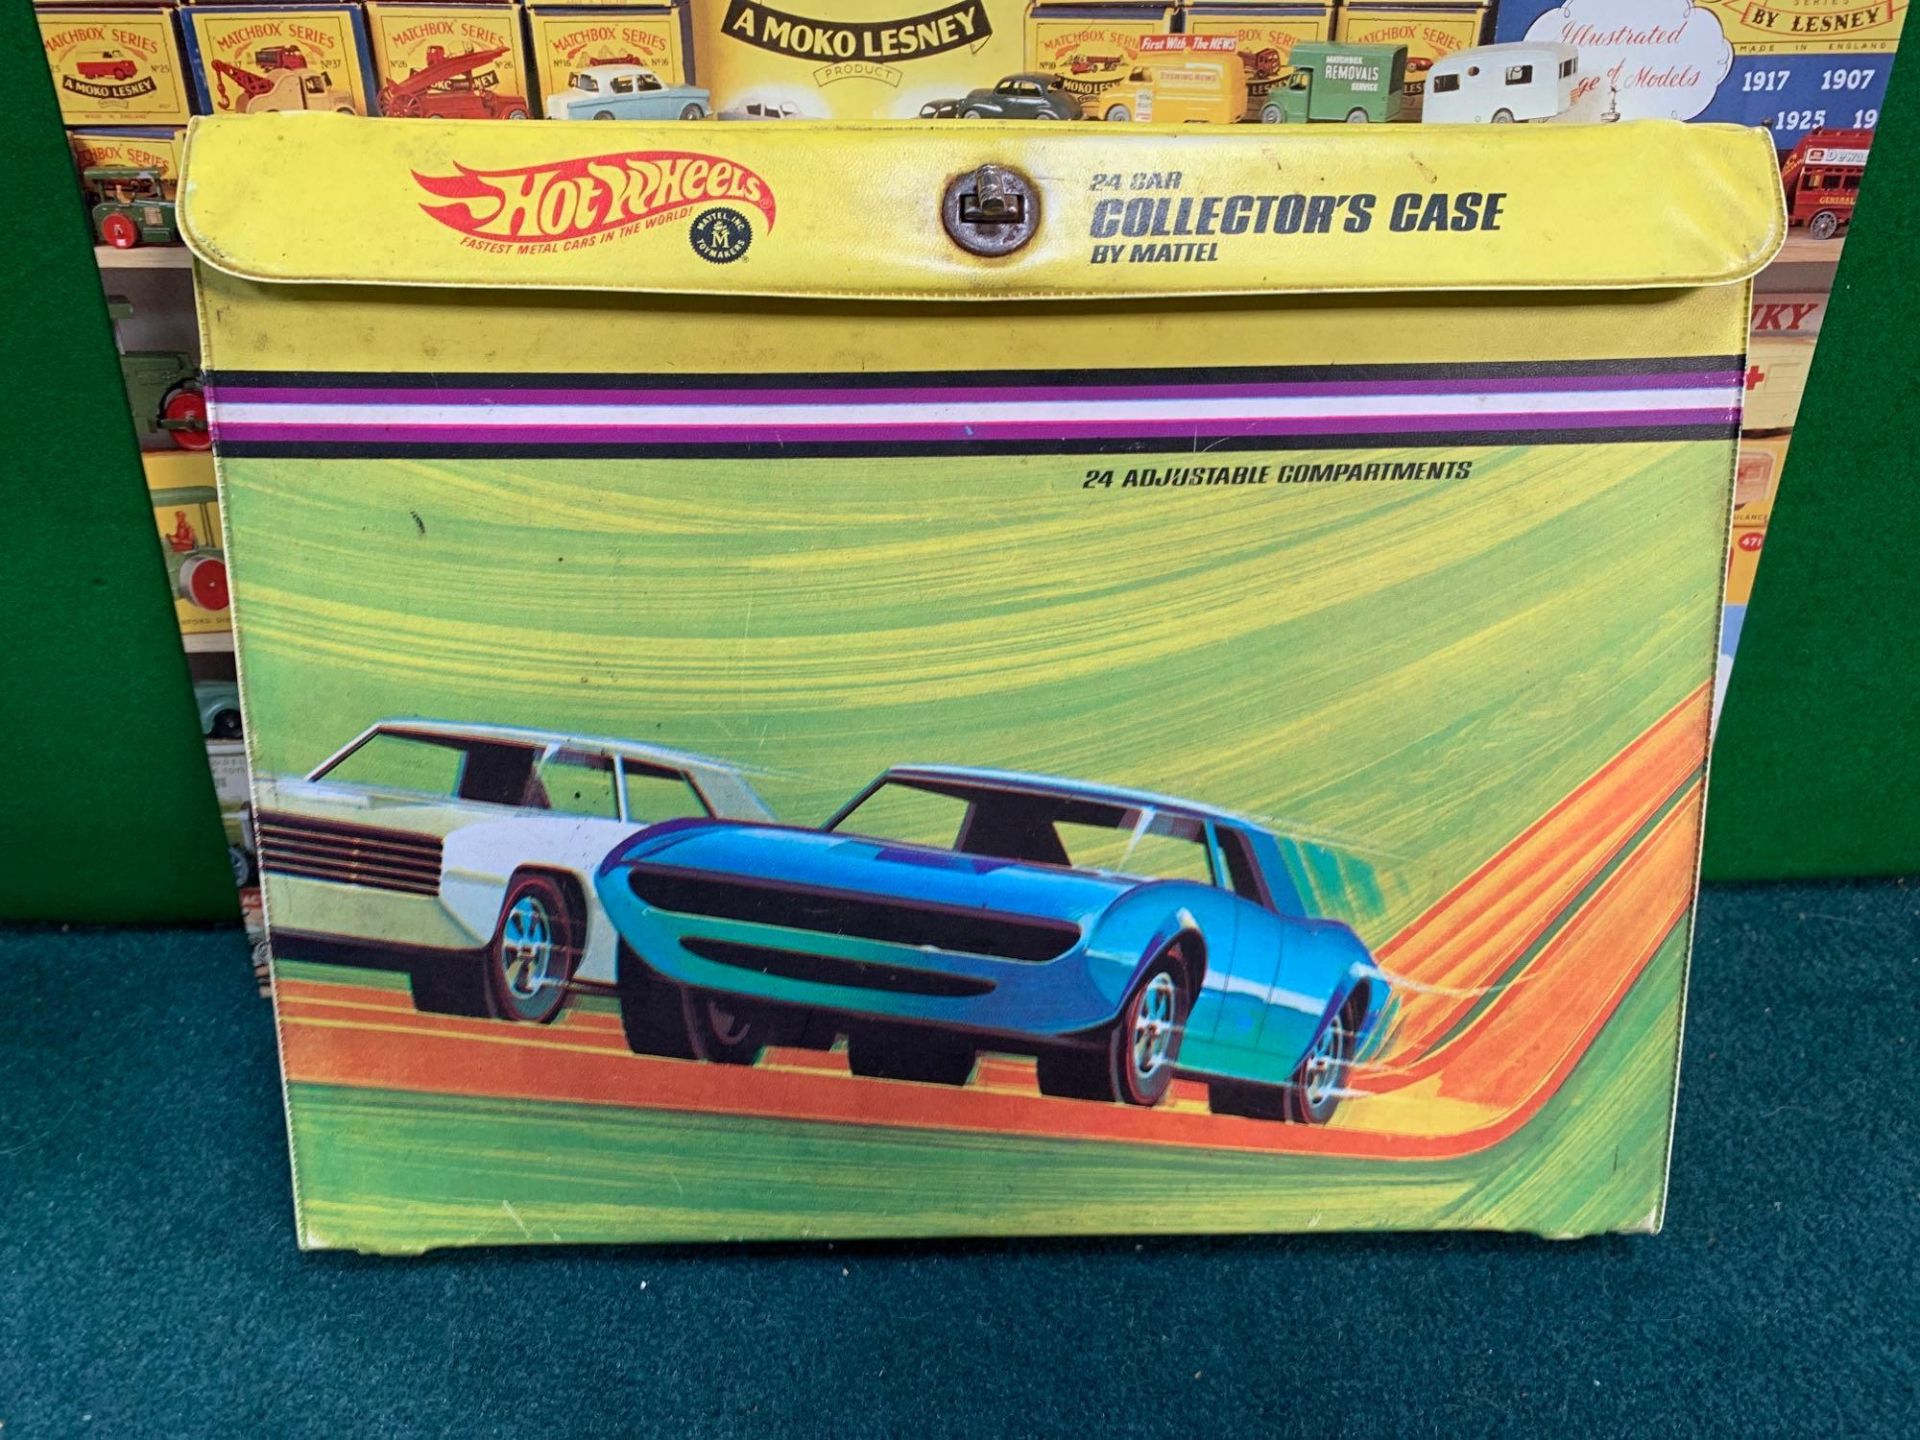 Hot Wheels Sticker Album With 2 X Carry Playset Cases - Image 6 of 9